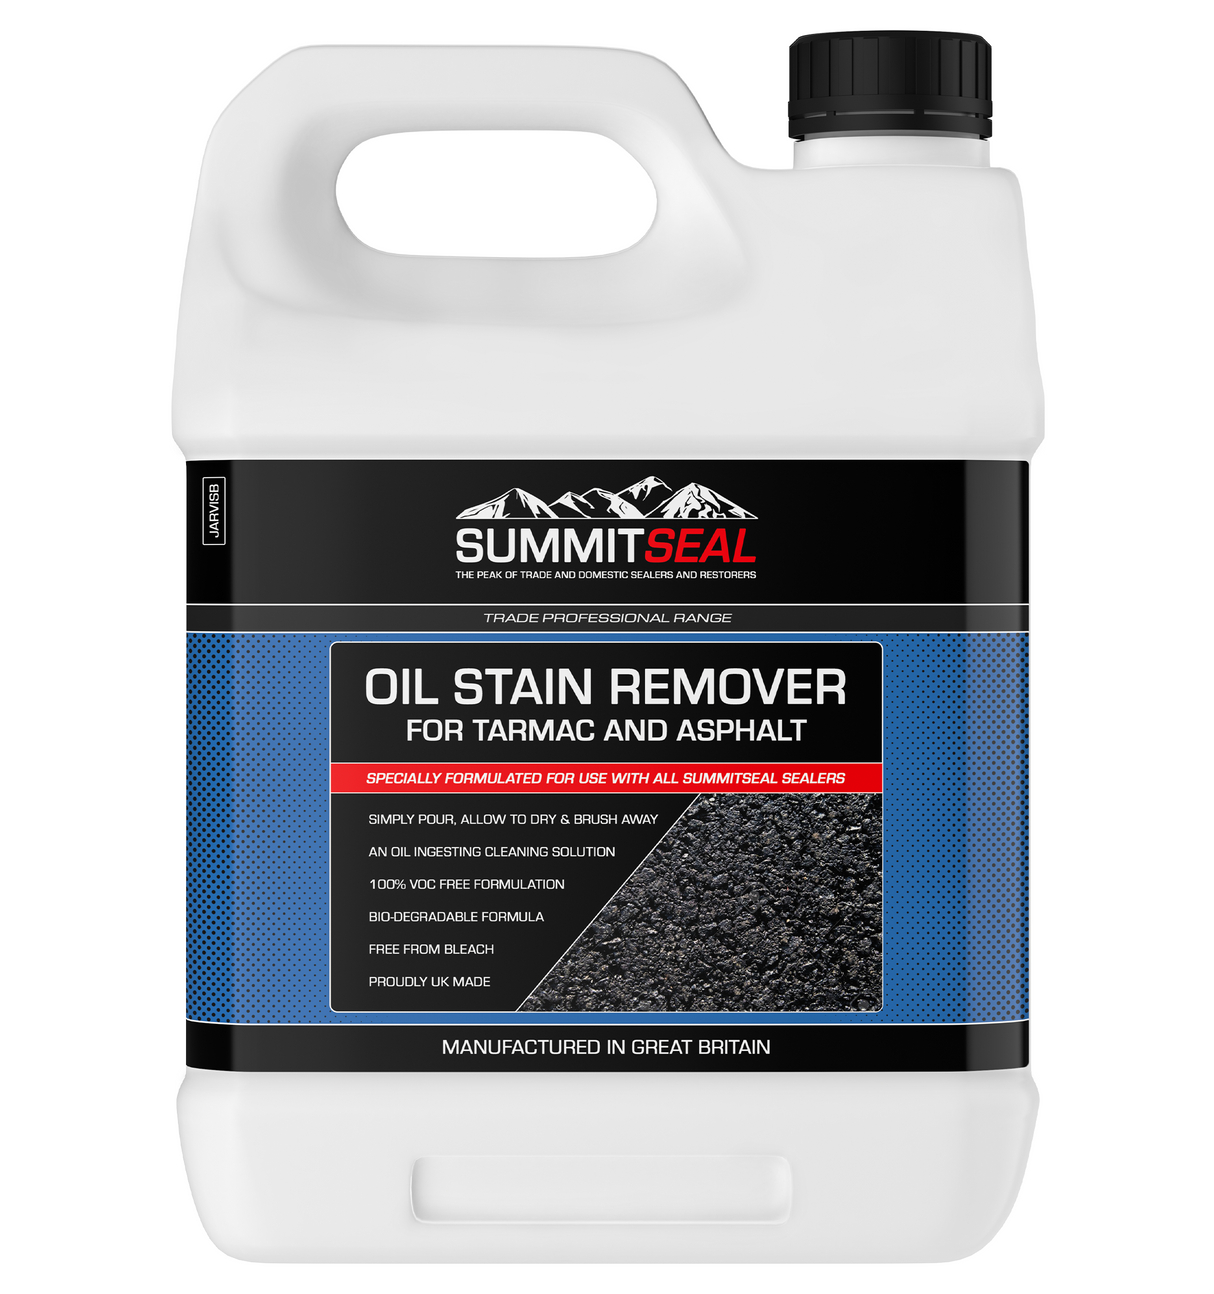 SummitSeal - Oil Stain Remover for Tarmac and Asphalt (Available in 1 & 5 Litre Sizes)